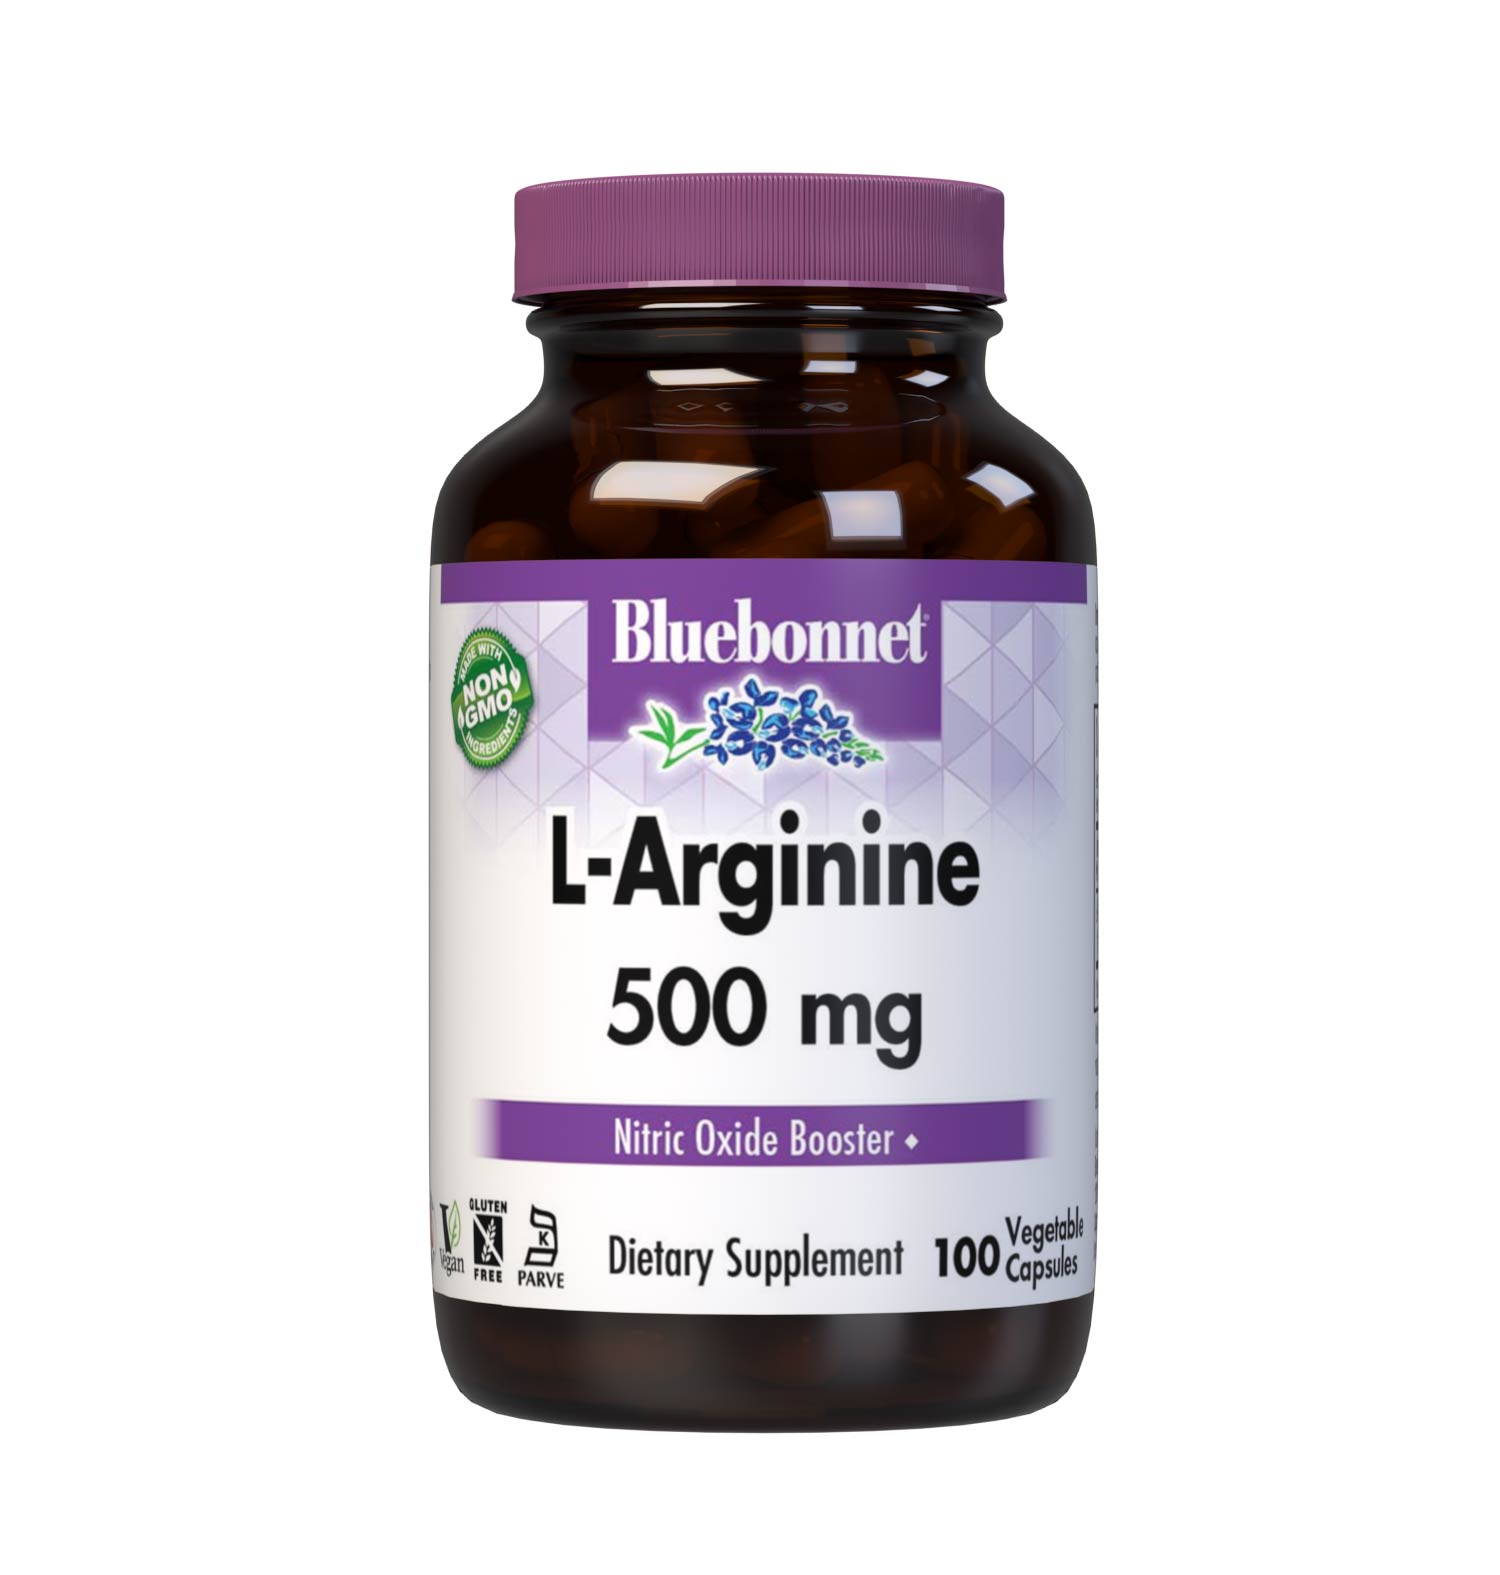 Bluebonnet’s L-Arginine 500 mg 100 vegetable capsules are formulated with the free form amino acid L-arginine in its crystalline form from Ajinomoto which promotes nitric oxide synthesis and men's health. #size_100 count